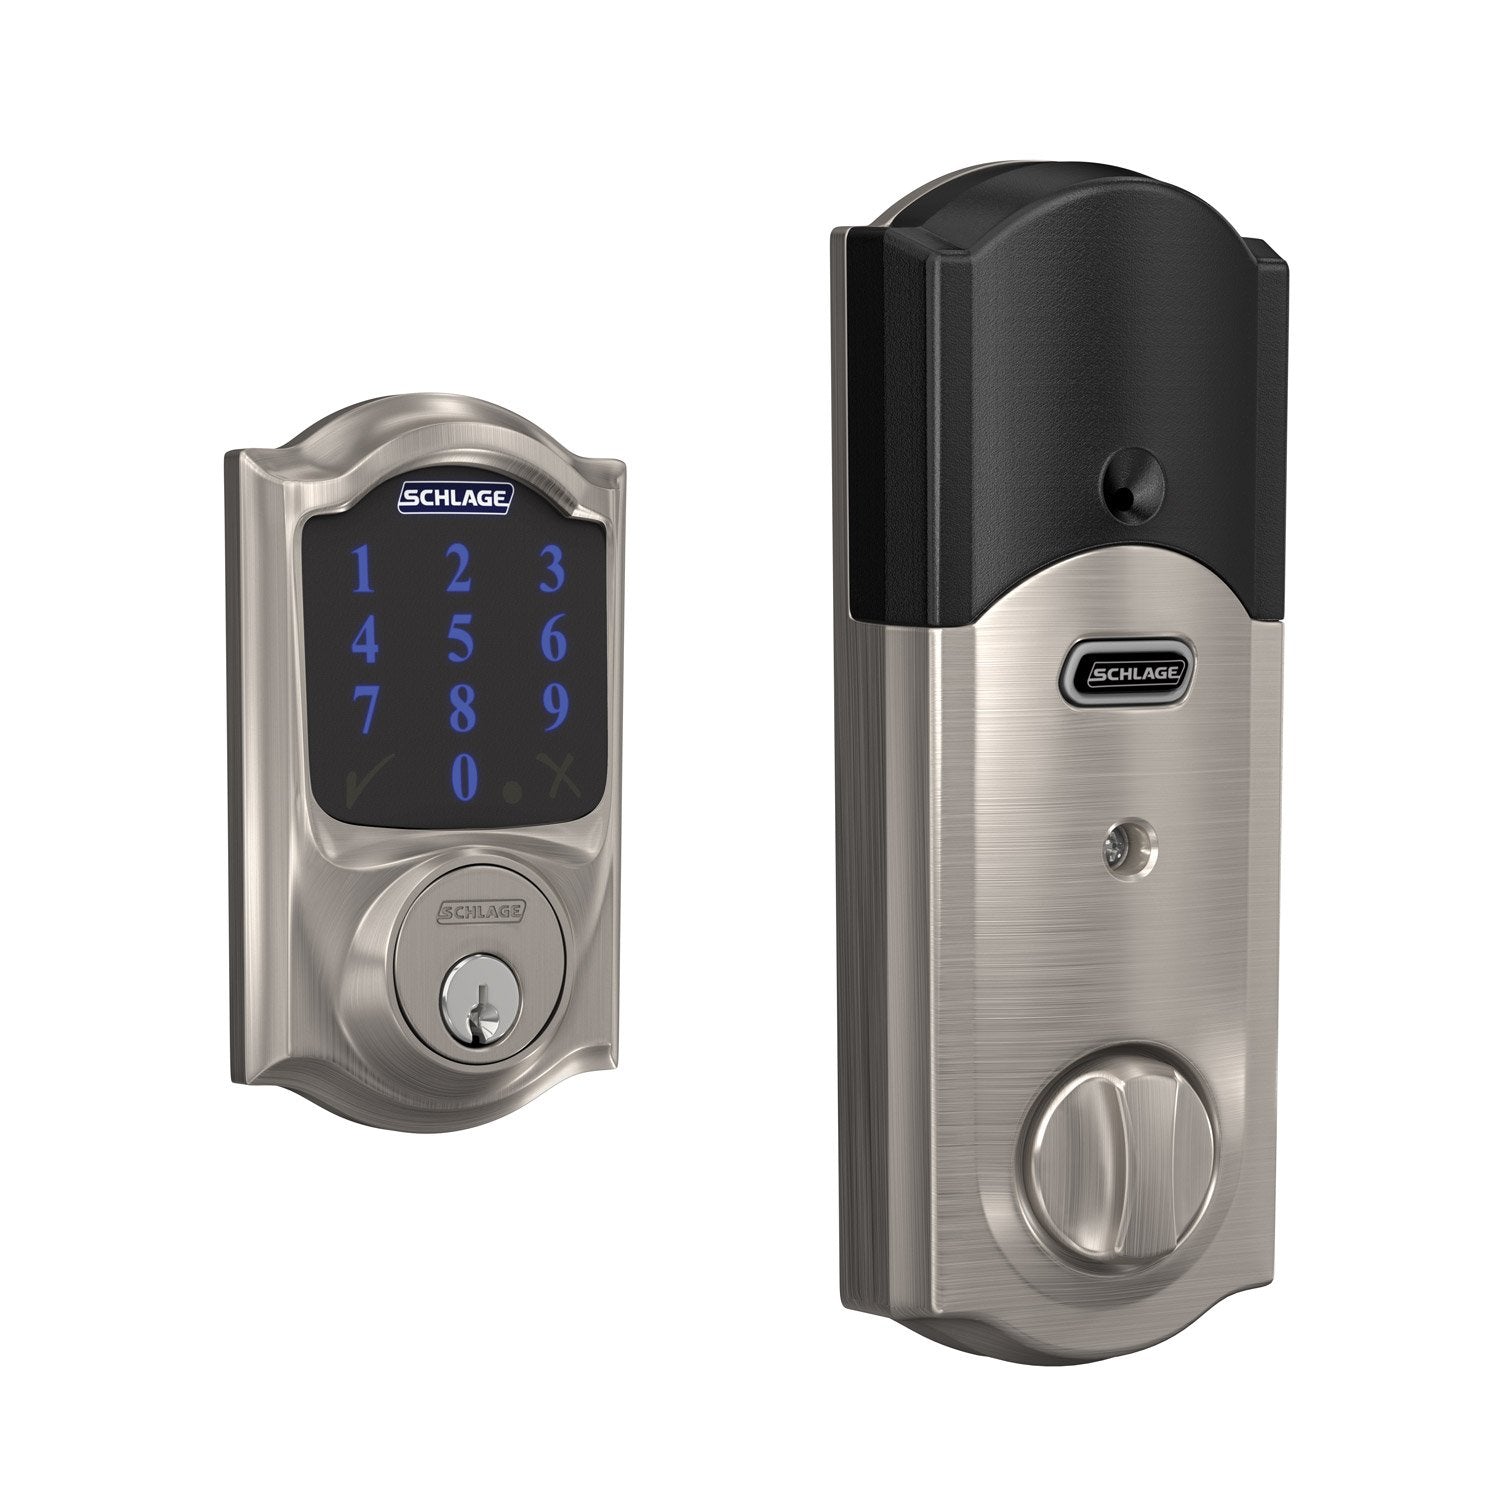 Schlage Connect Smart Deadbolt, Z-Wave Plus Enabled (for Works with Ring Alarm Security System) - Satin Nickel